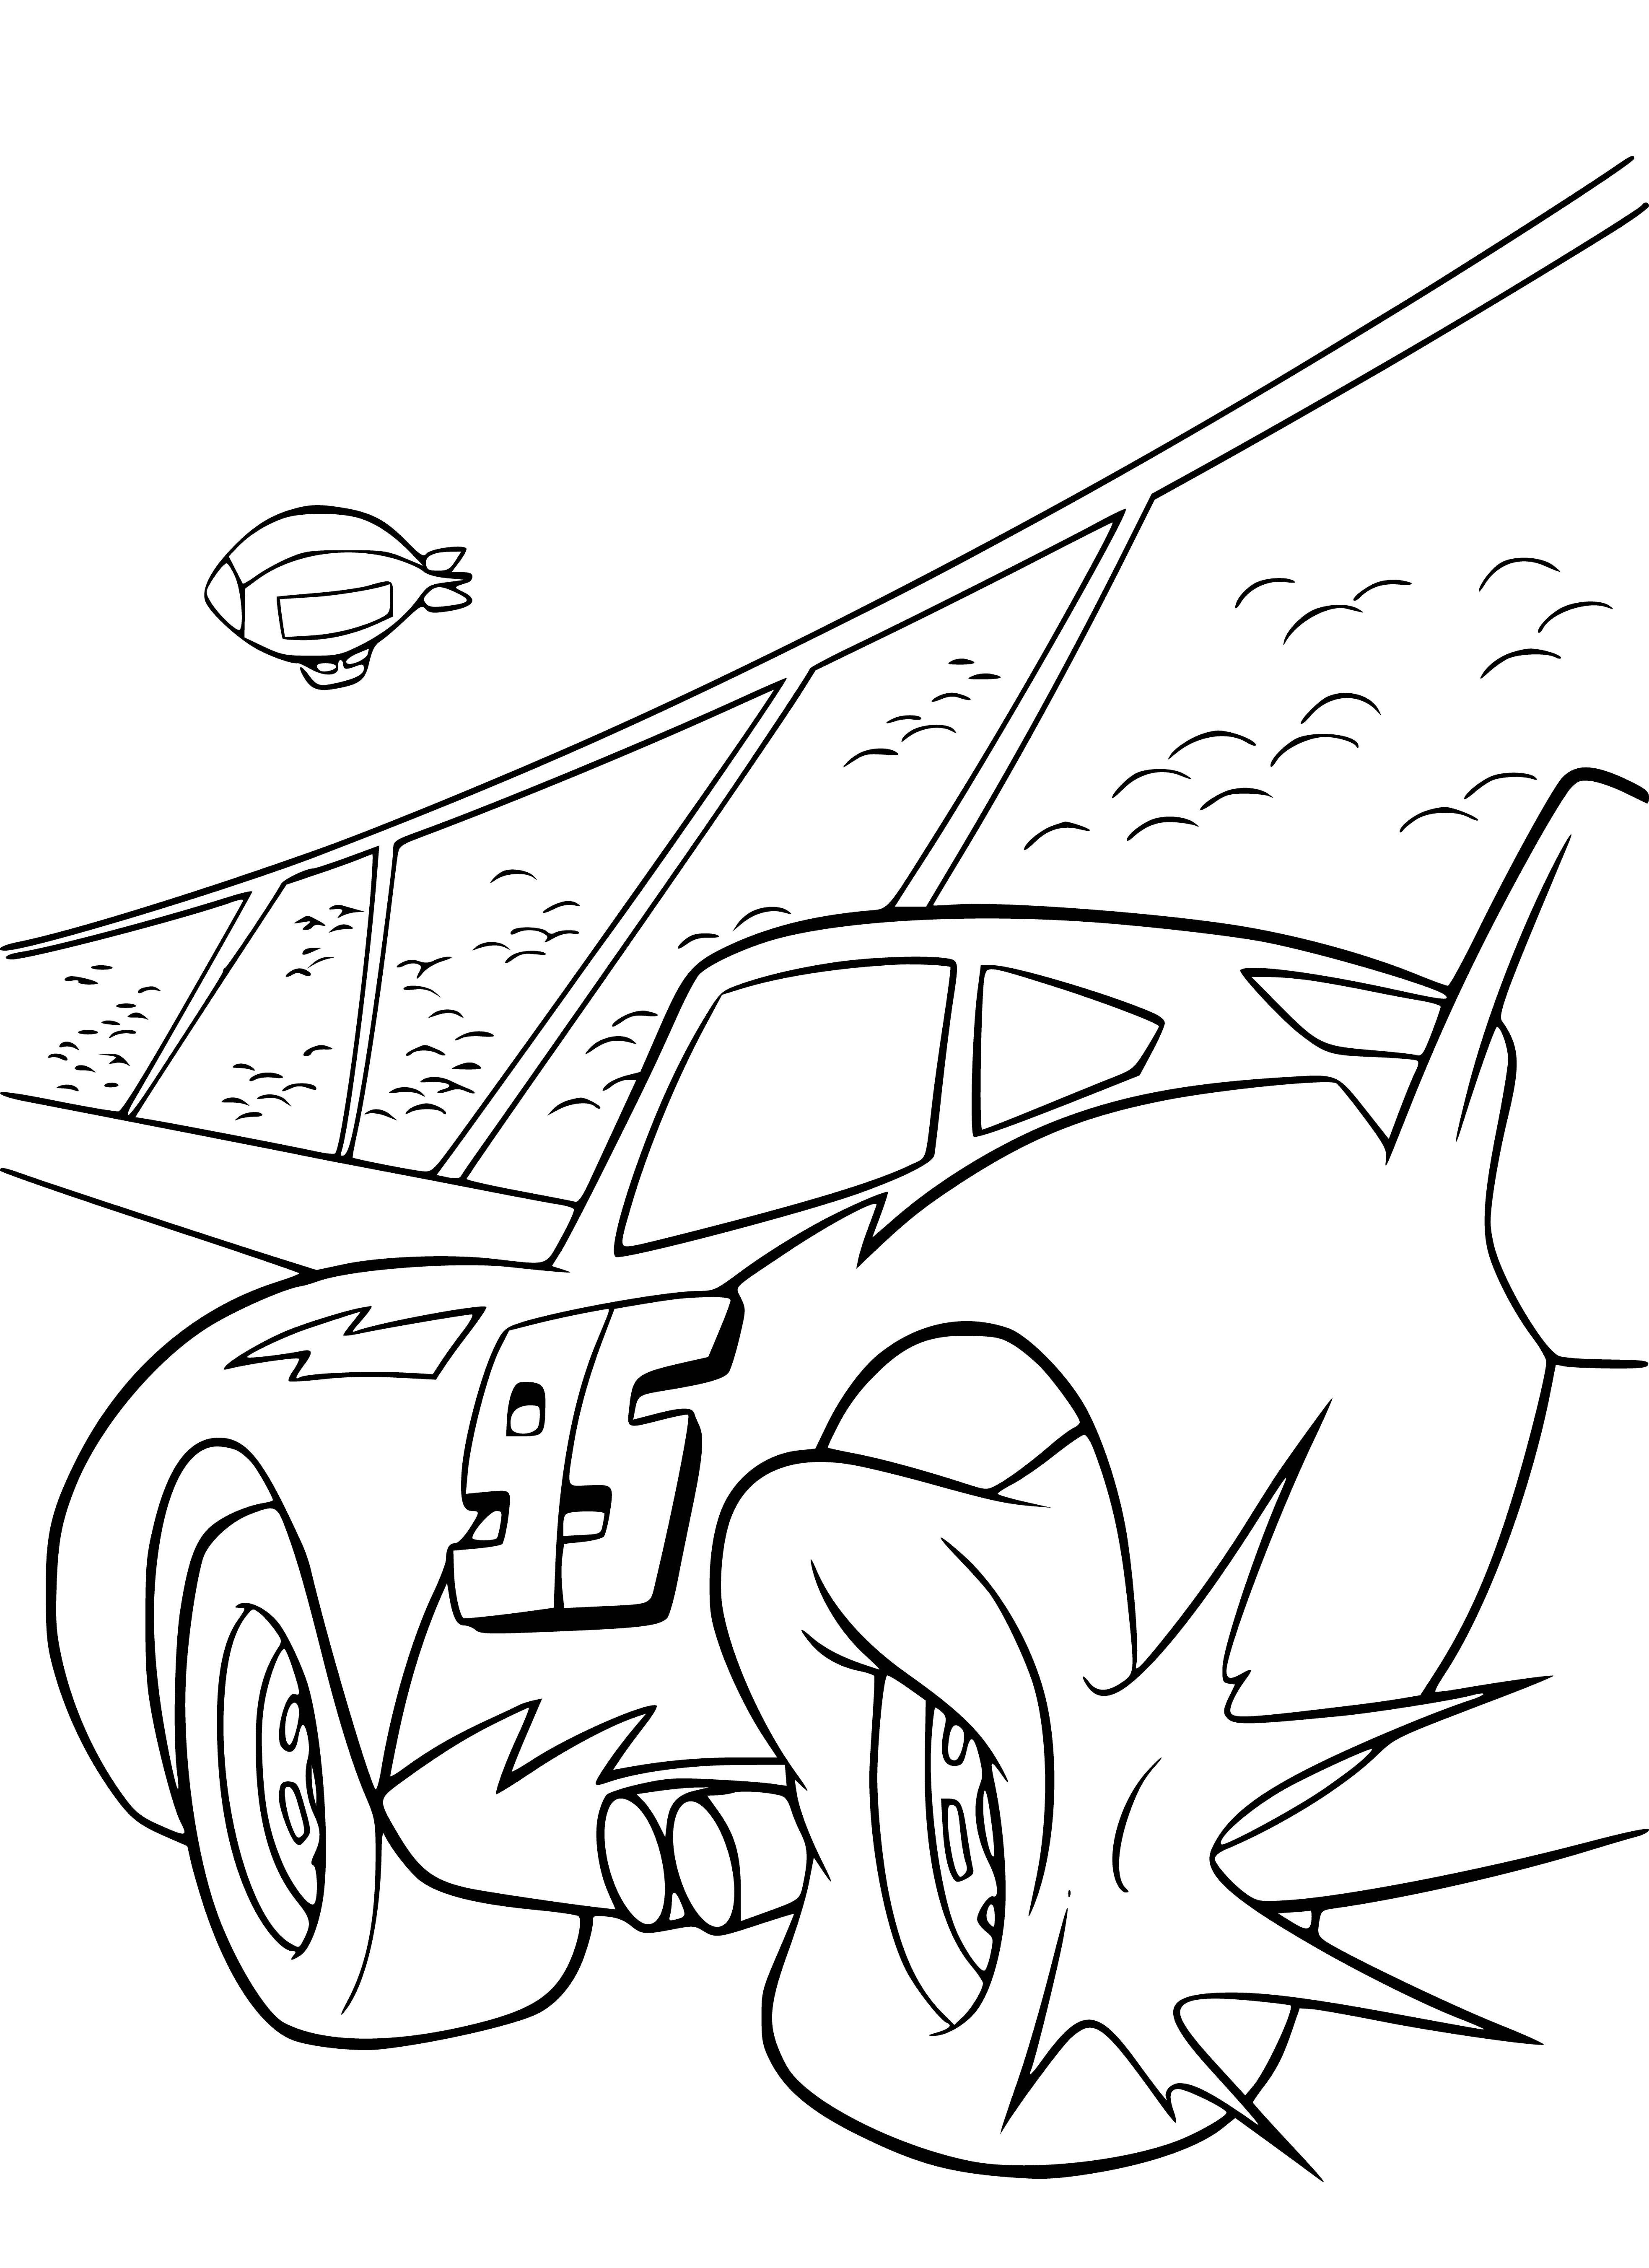 coloring page: Car in accident: wheel burst, tire flat, rim bent. Looked like serious crash. #roadaccident